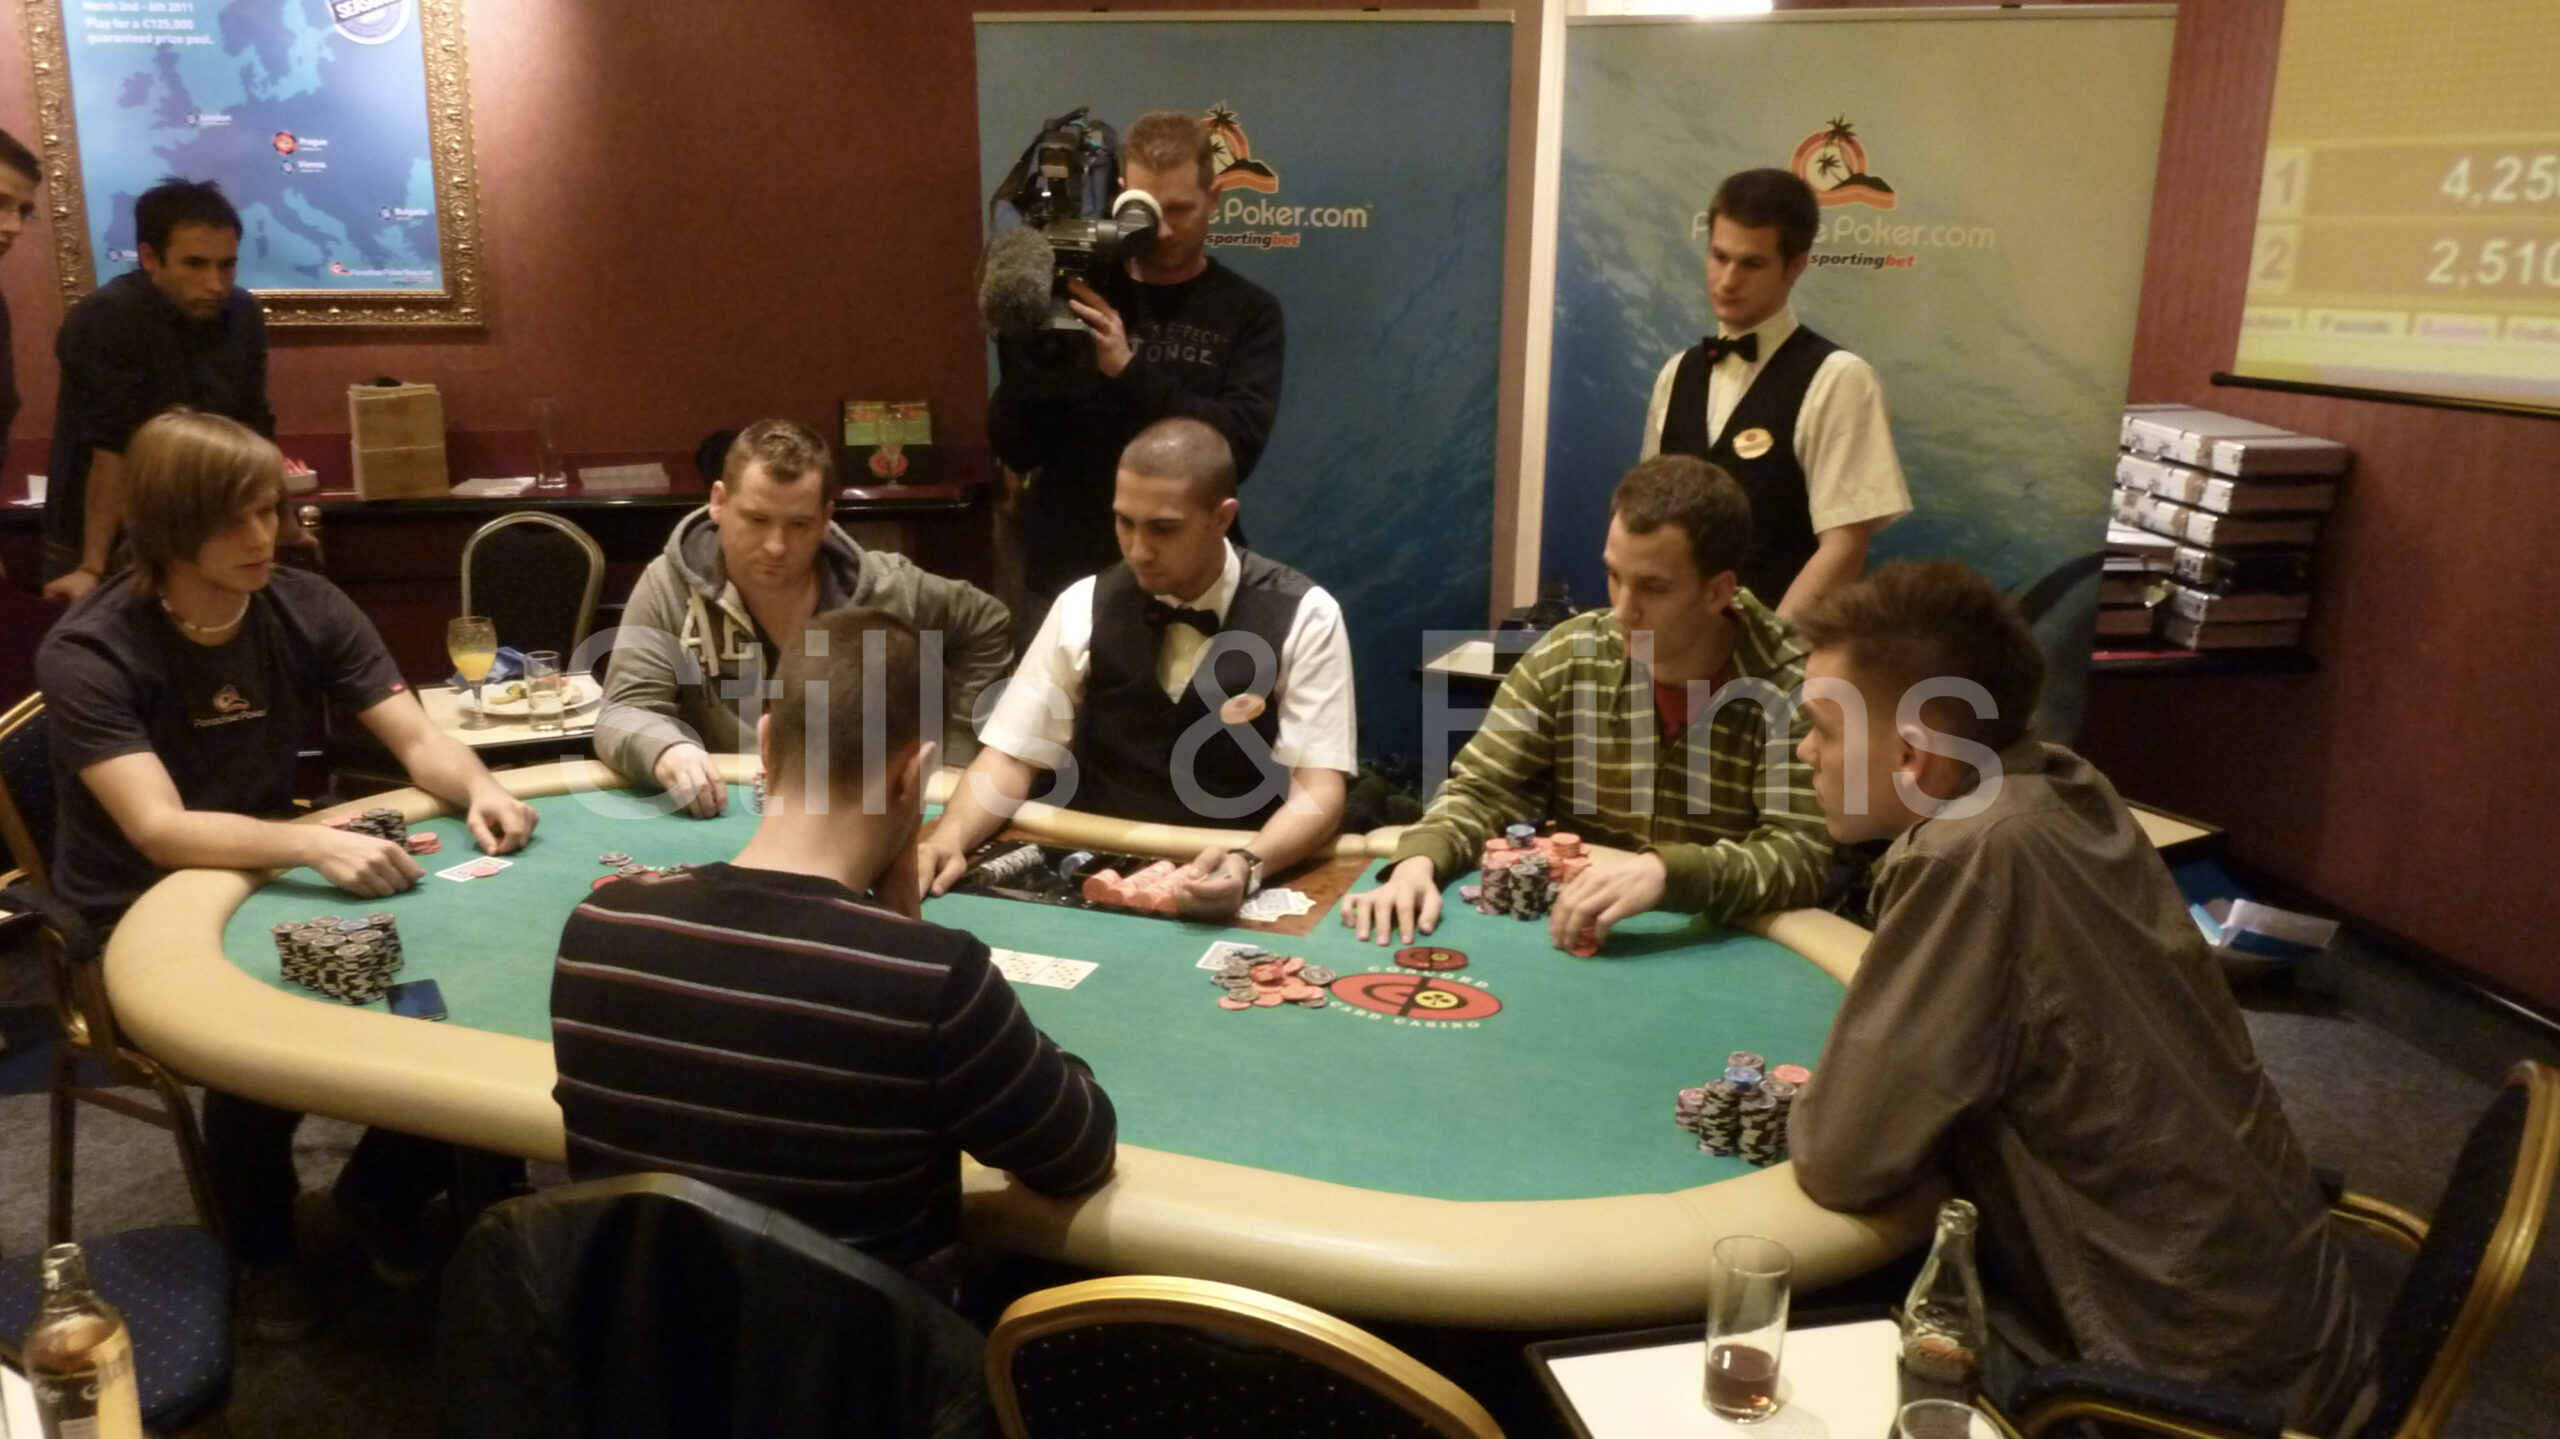 Camera crew in Warsaw films a poker tournament for a US client